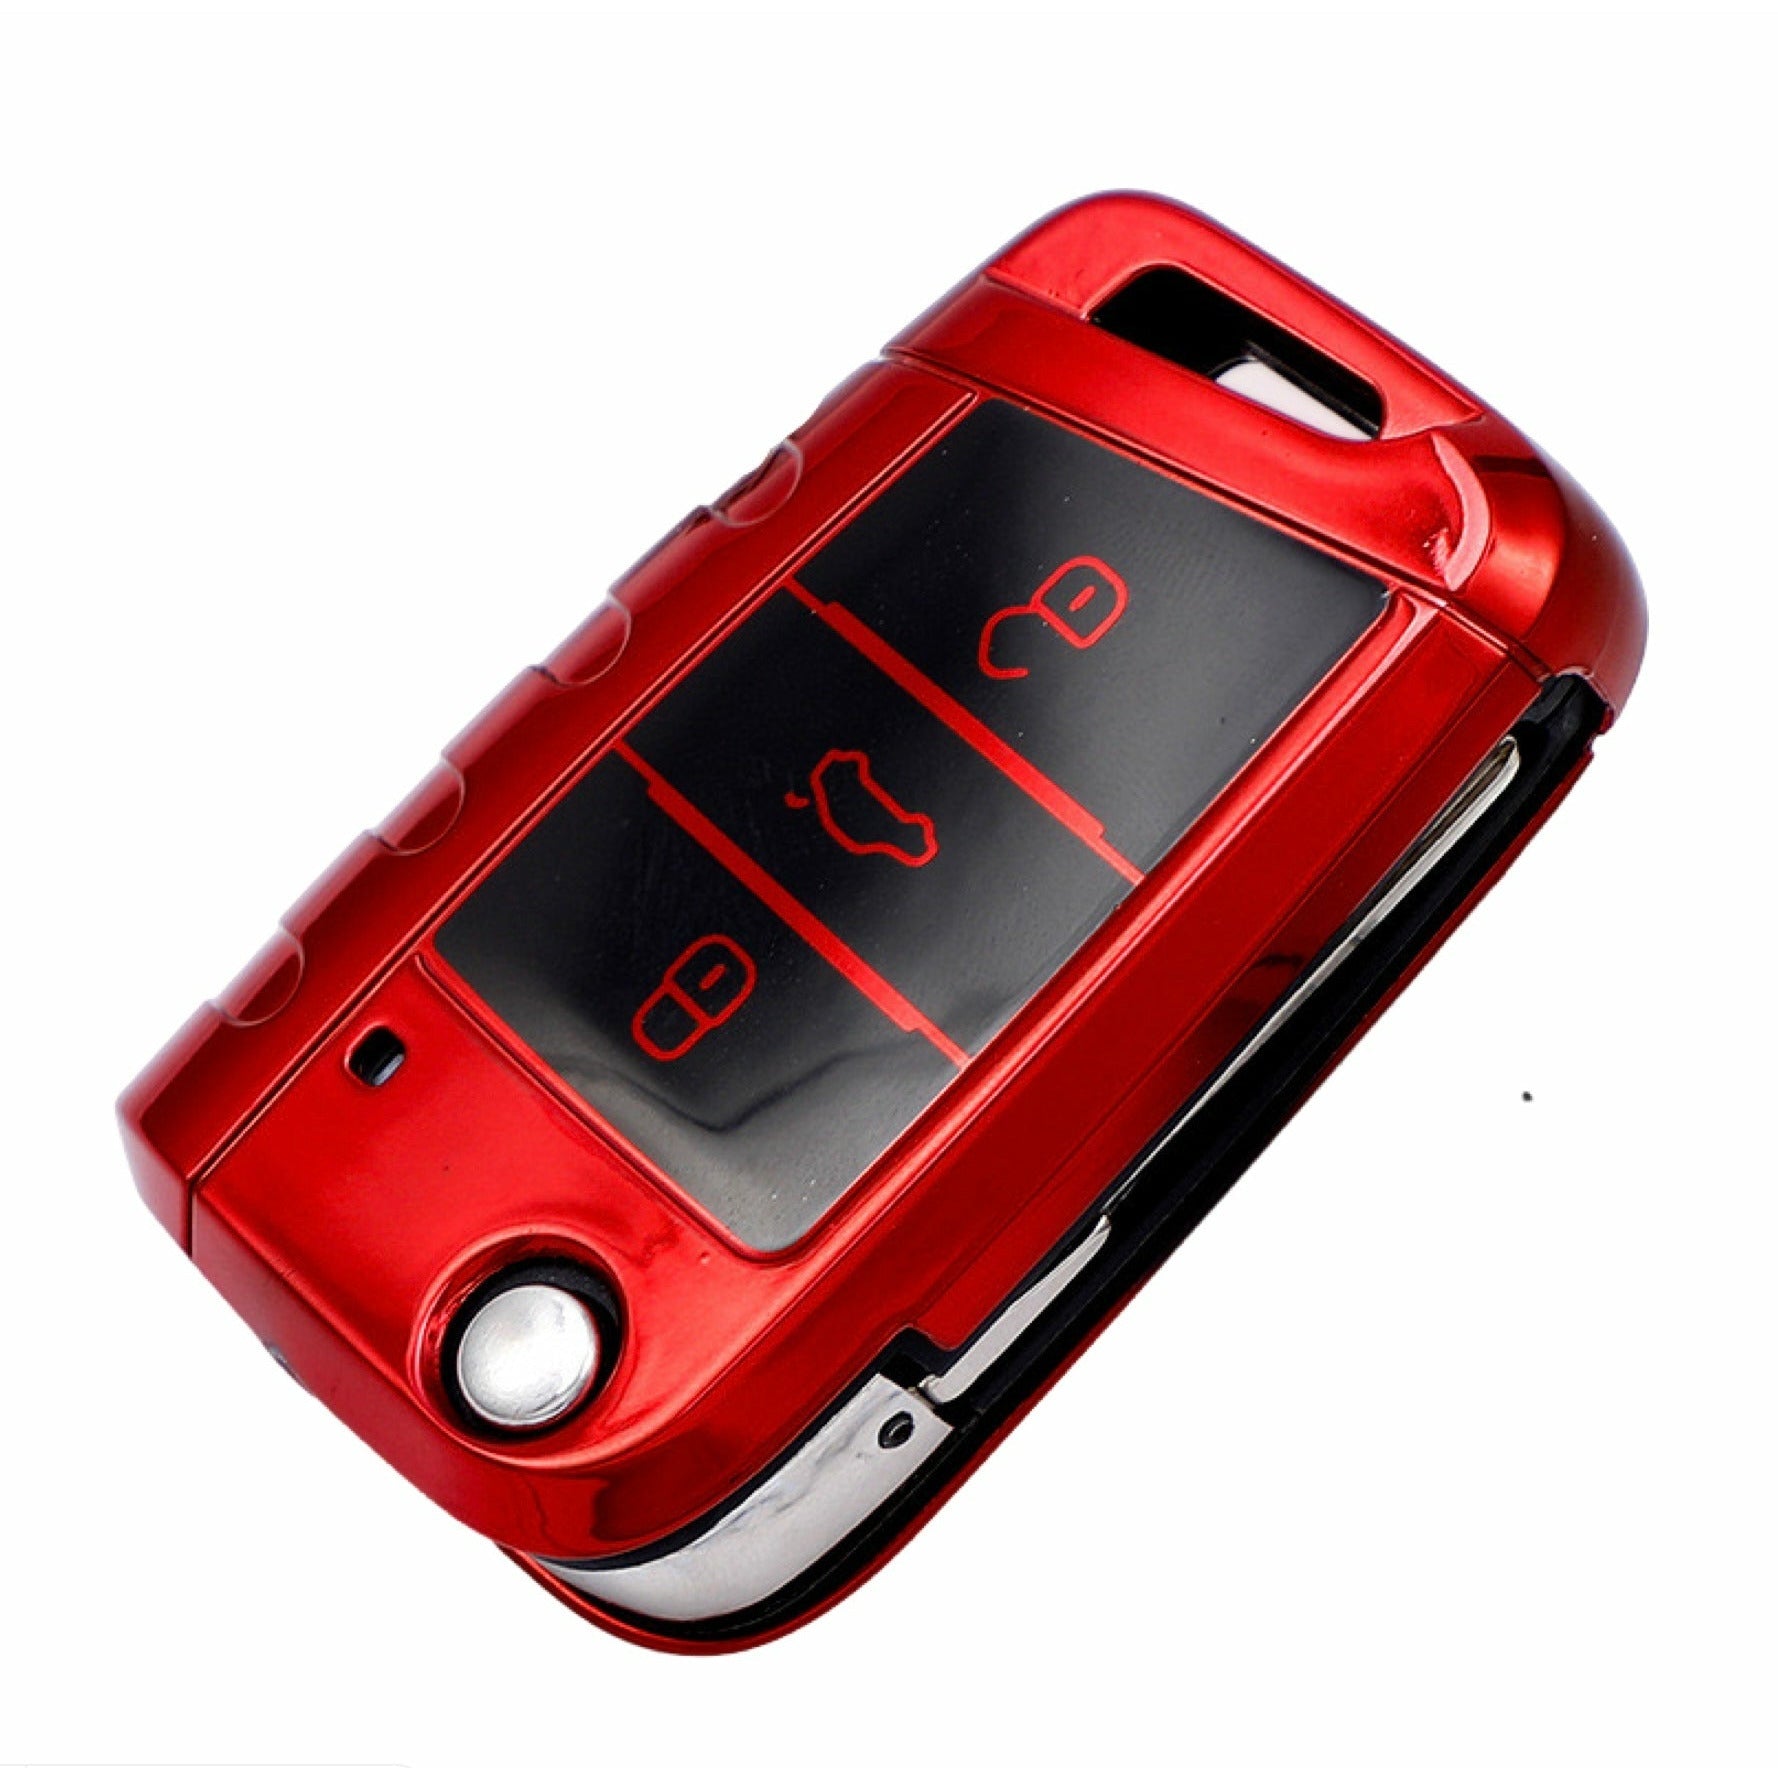 Car Key Cover for VW Golf, Polo, Passat, Skoda, Seat / 3 Buttons. red